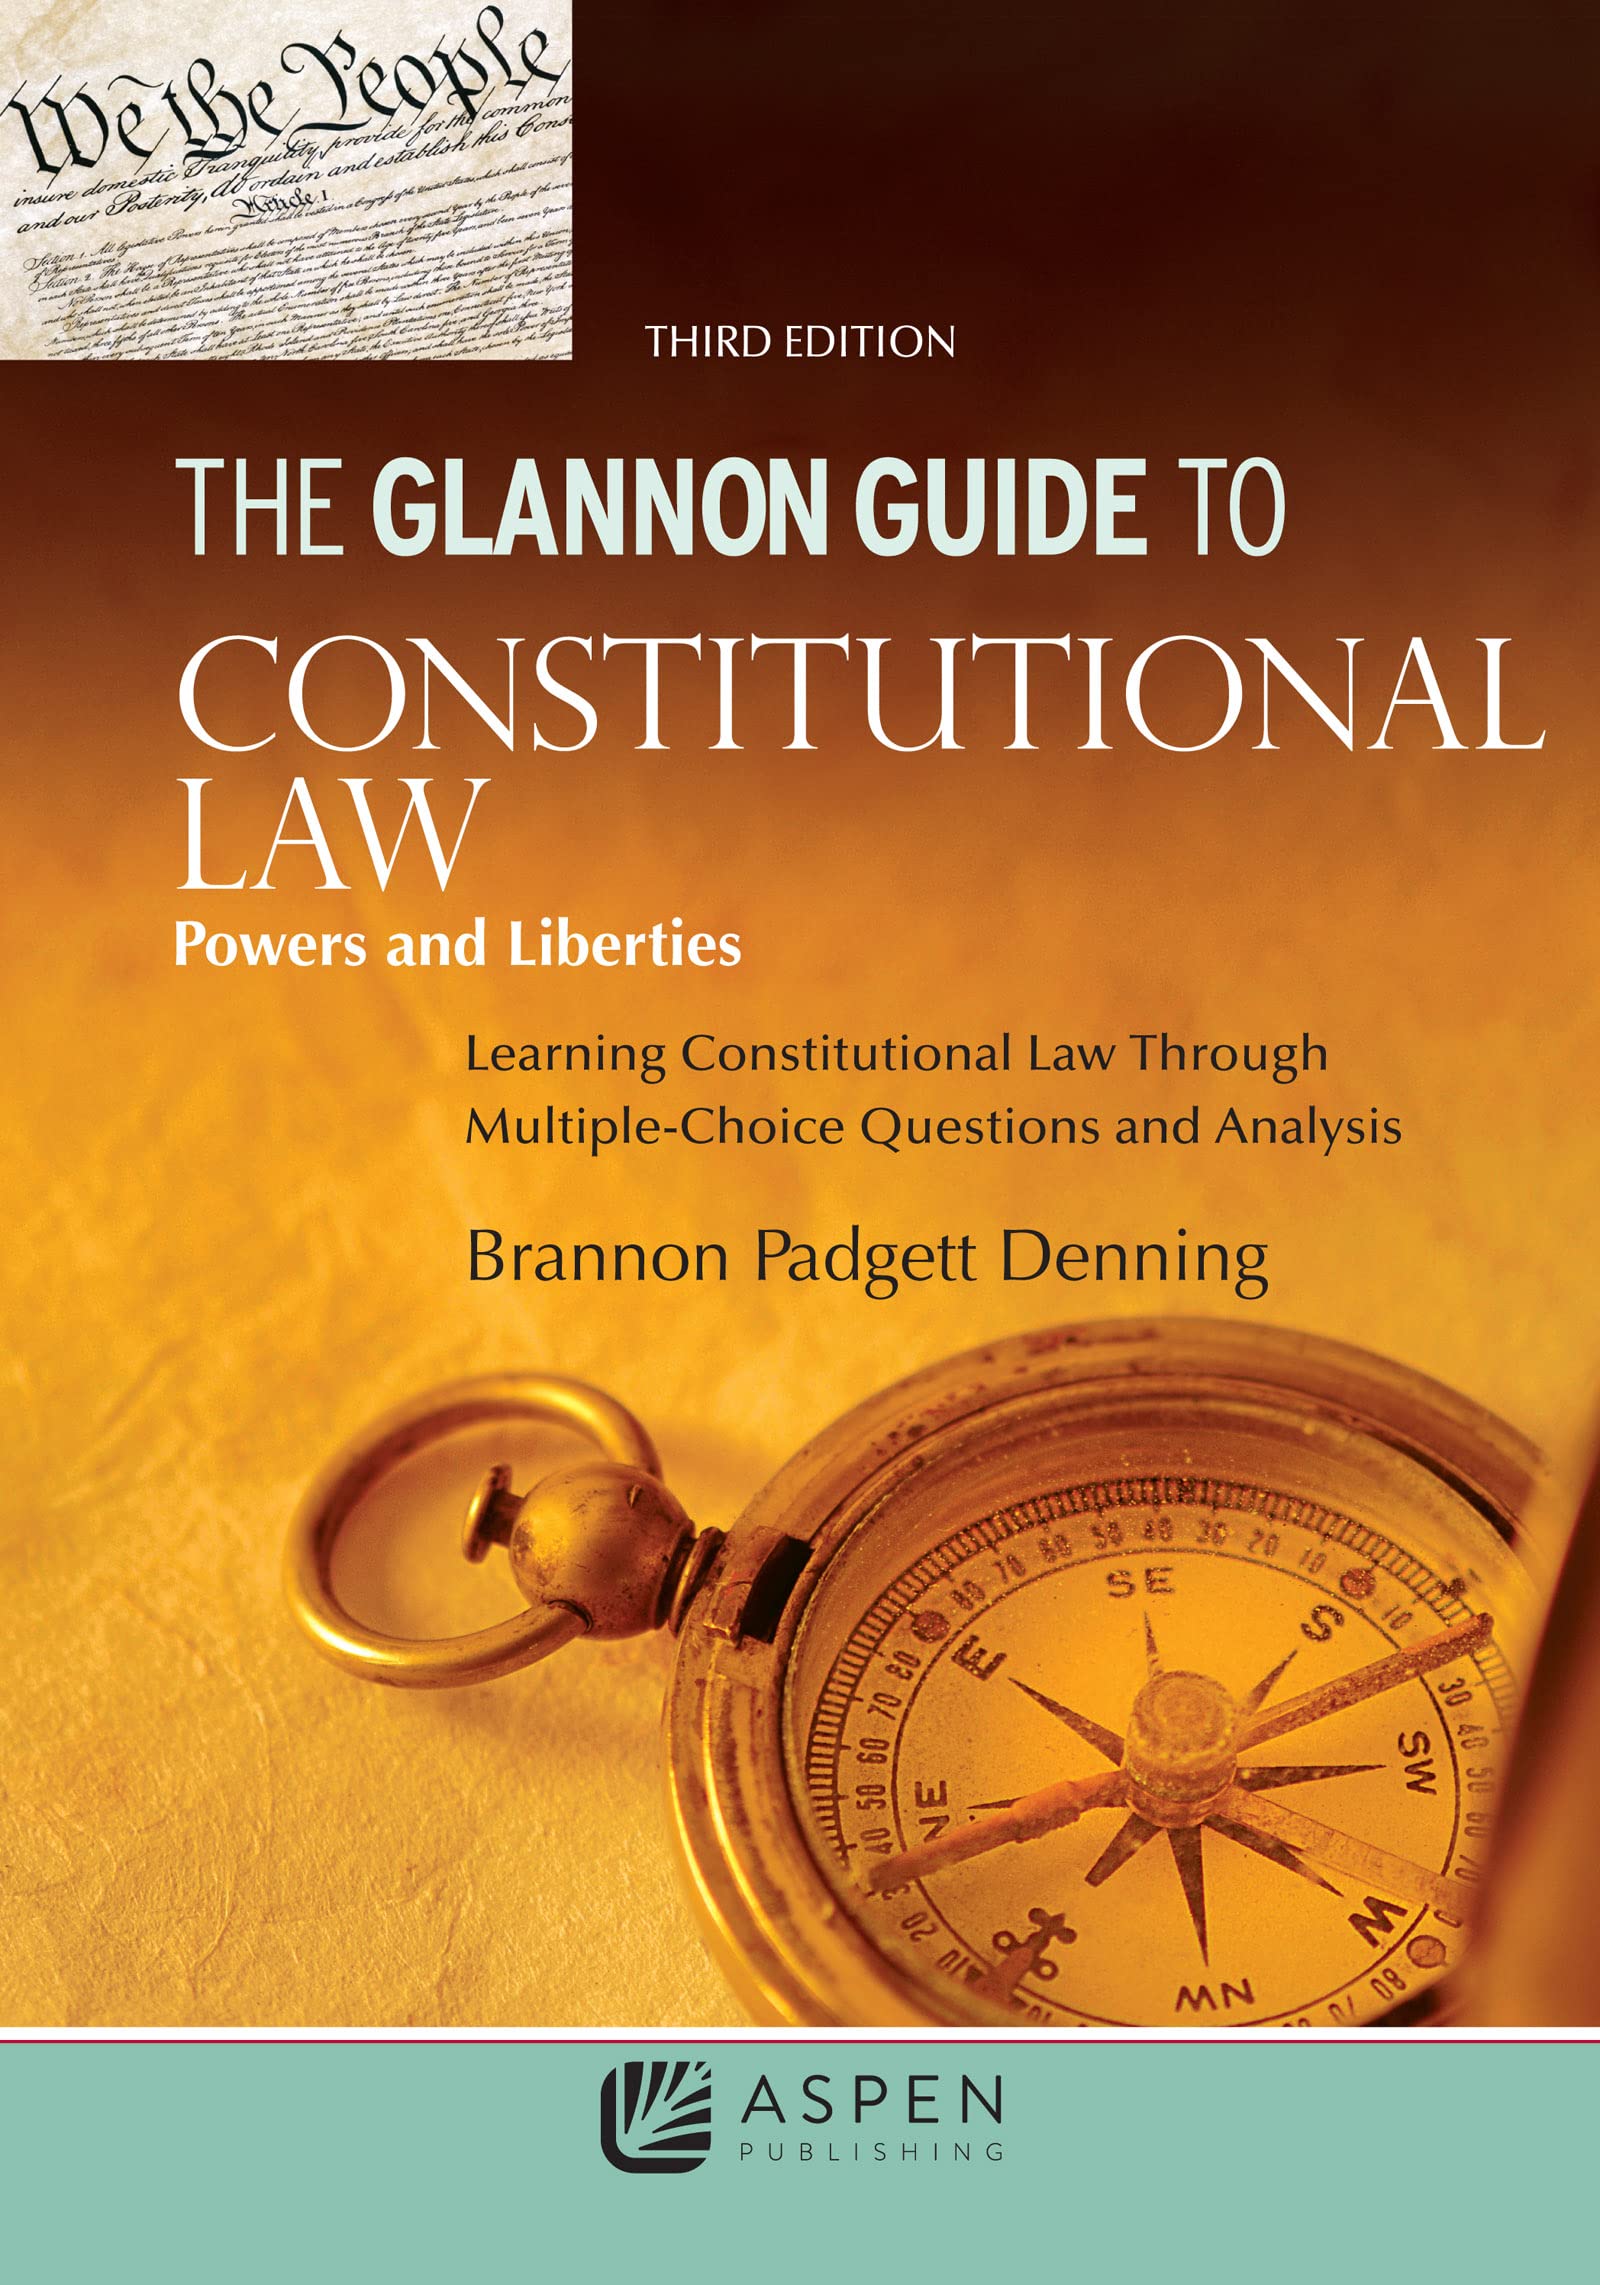 The Glannon Guide to Constitutional Law: Powers and Liberties: Learning Constitutional Law Through Multiple-Choice Questions and Analysis (Glannon Guides)